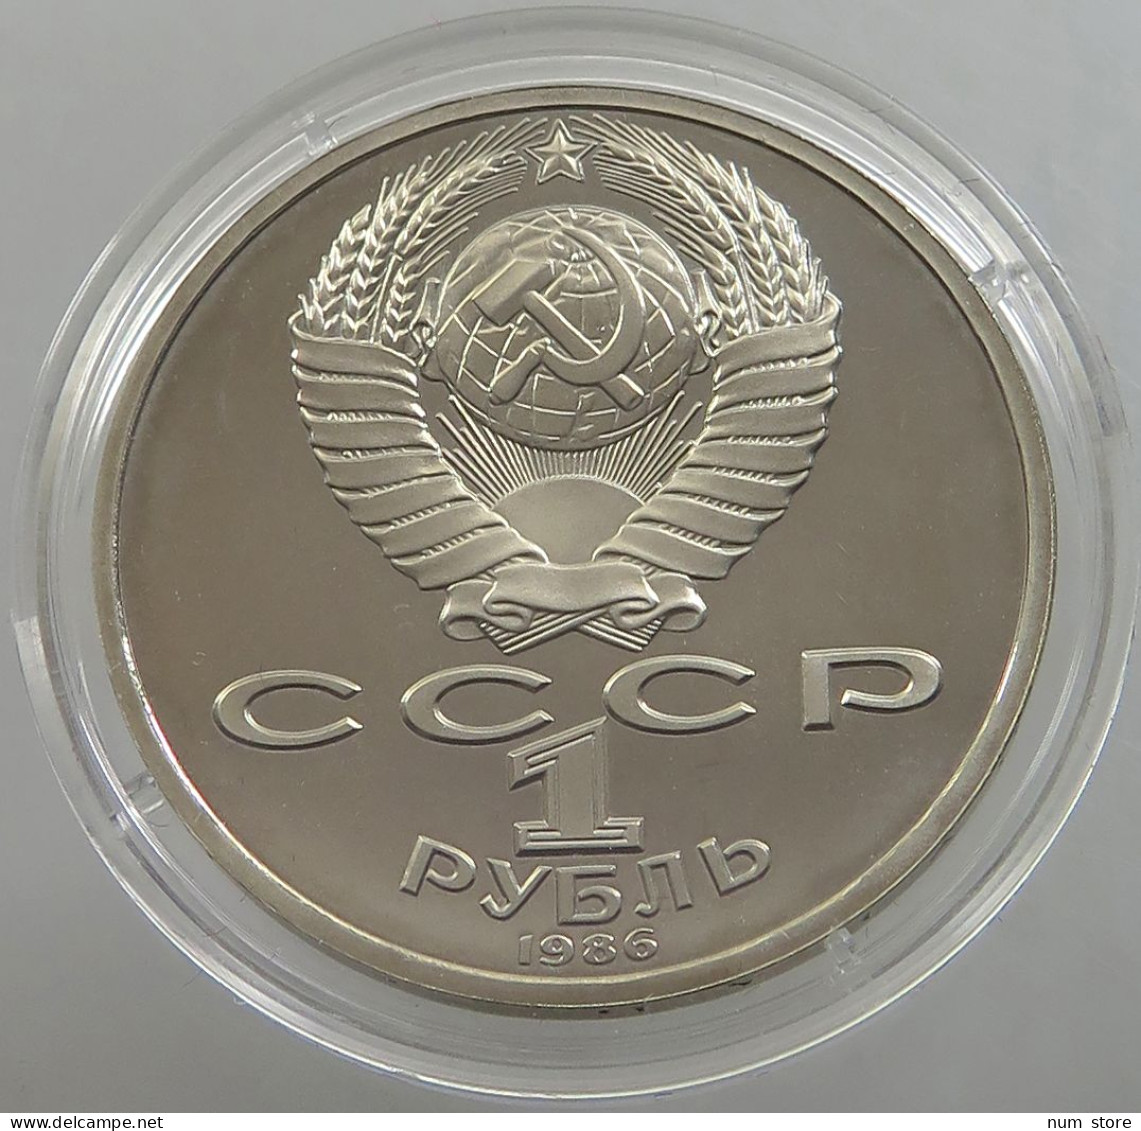 RUSSIA USSR 1 ROUBLE 1986 PROOF #sm14 0631 - Russia